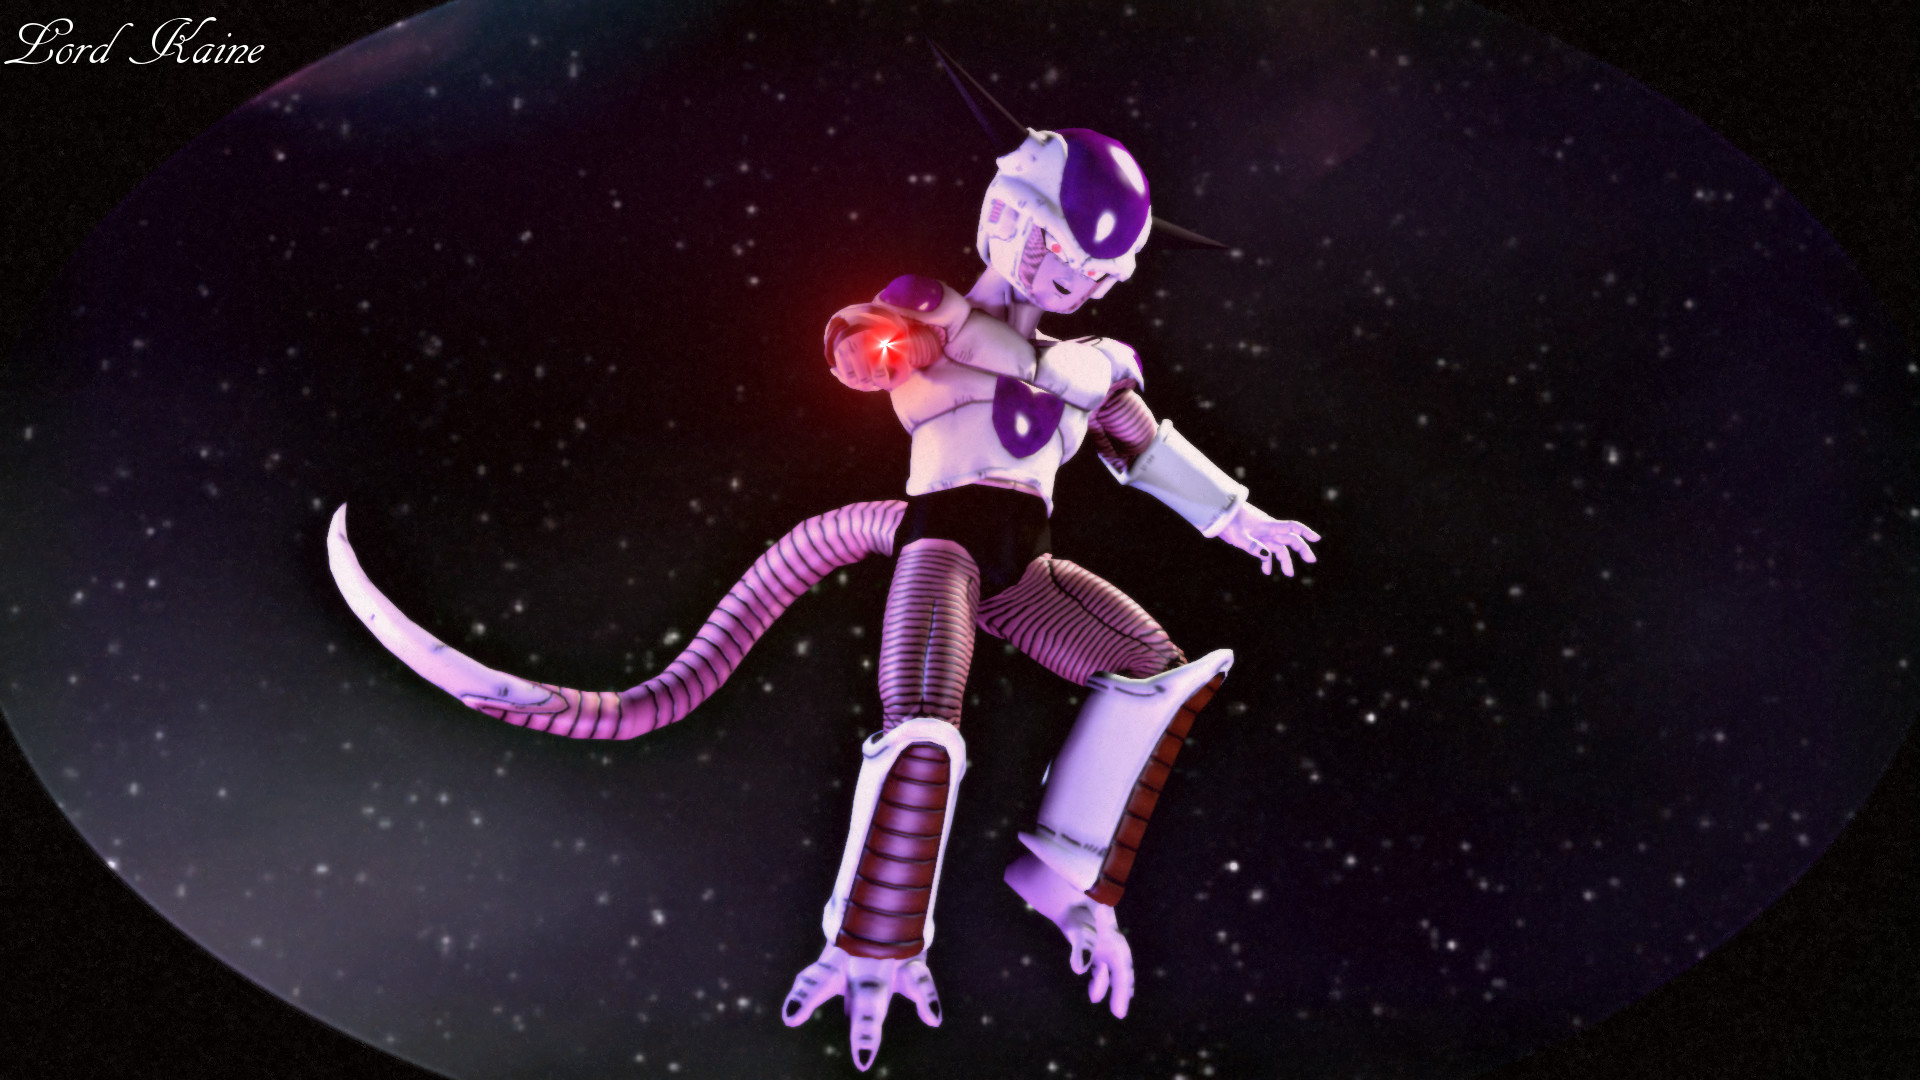 Frieza SFM Wallpaper First Form by Lord Kaine